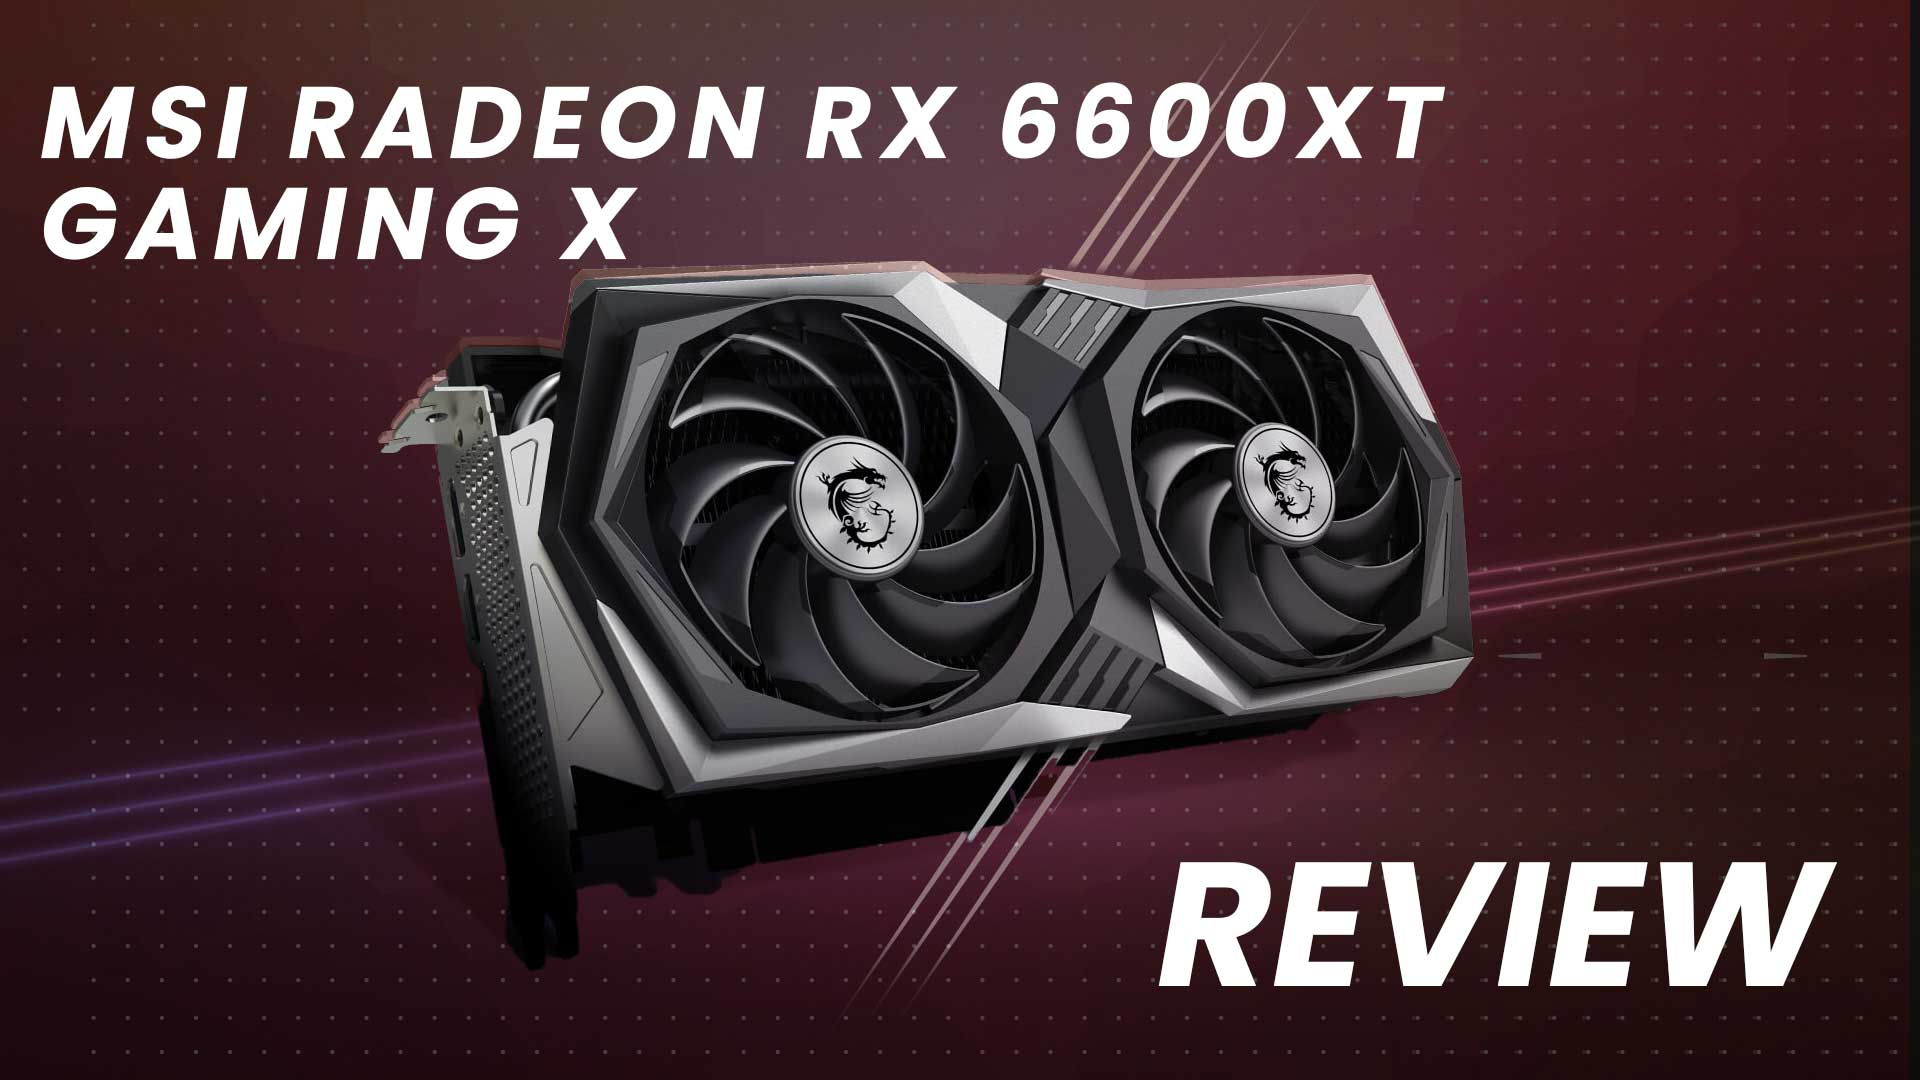 AMD's Radeon RX 6600 XT is an 'epic 1080p' graphics card with a not-nice  price